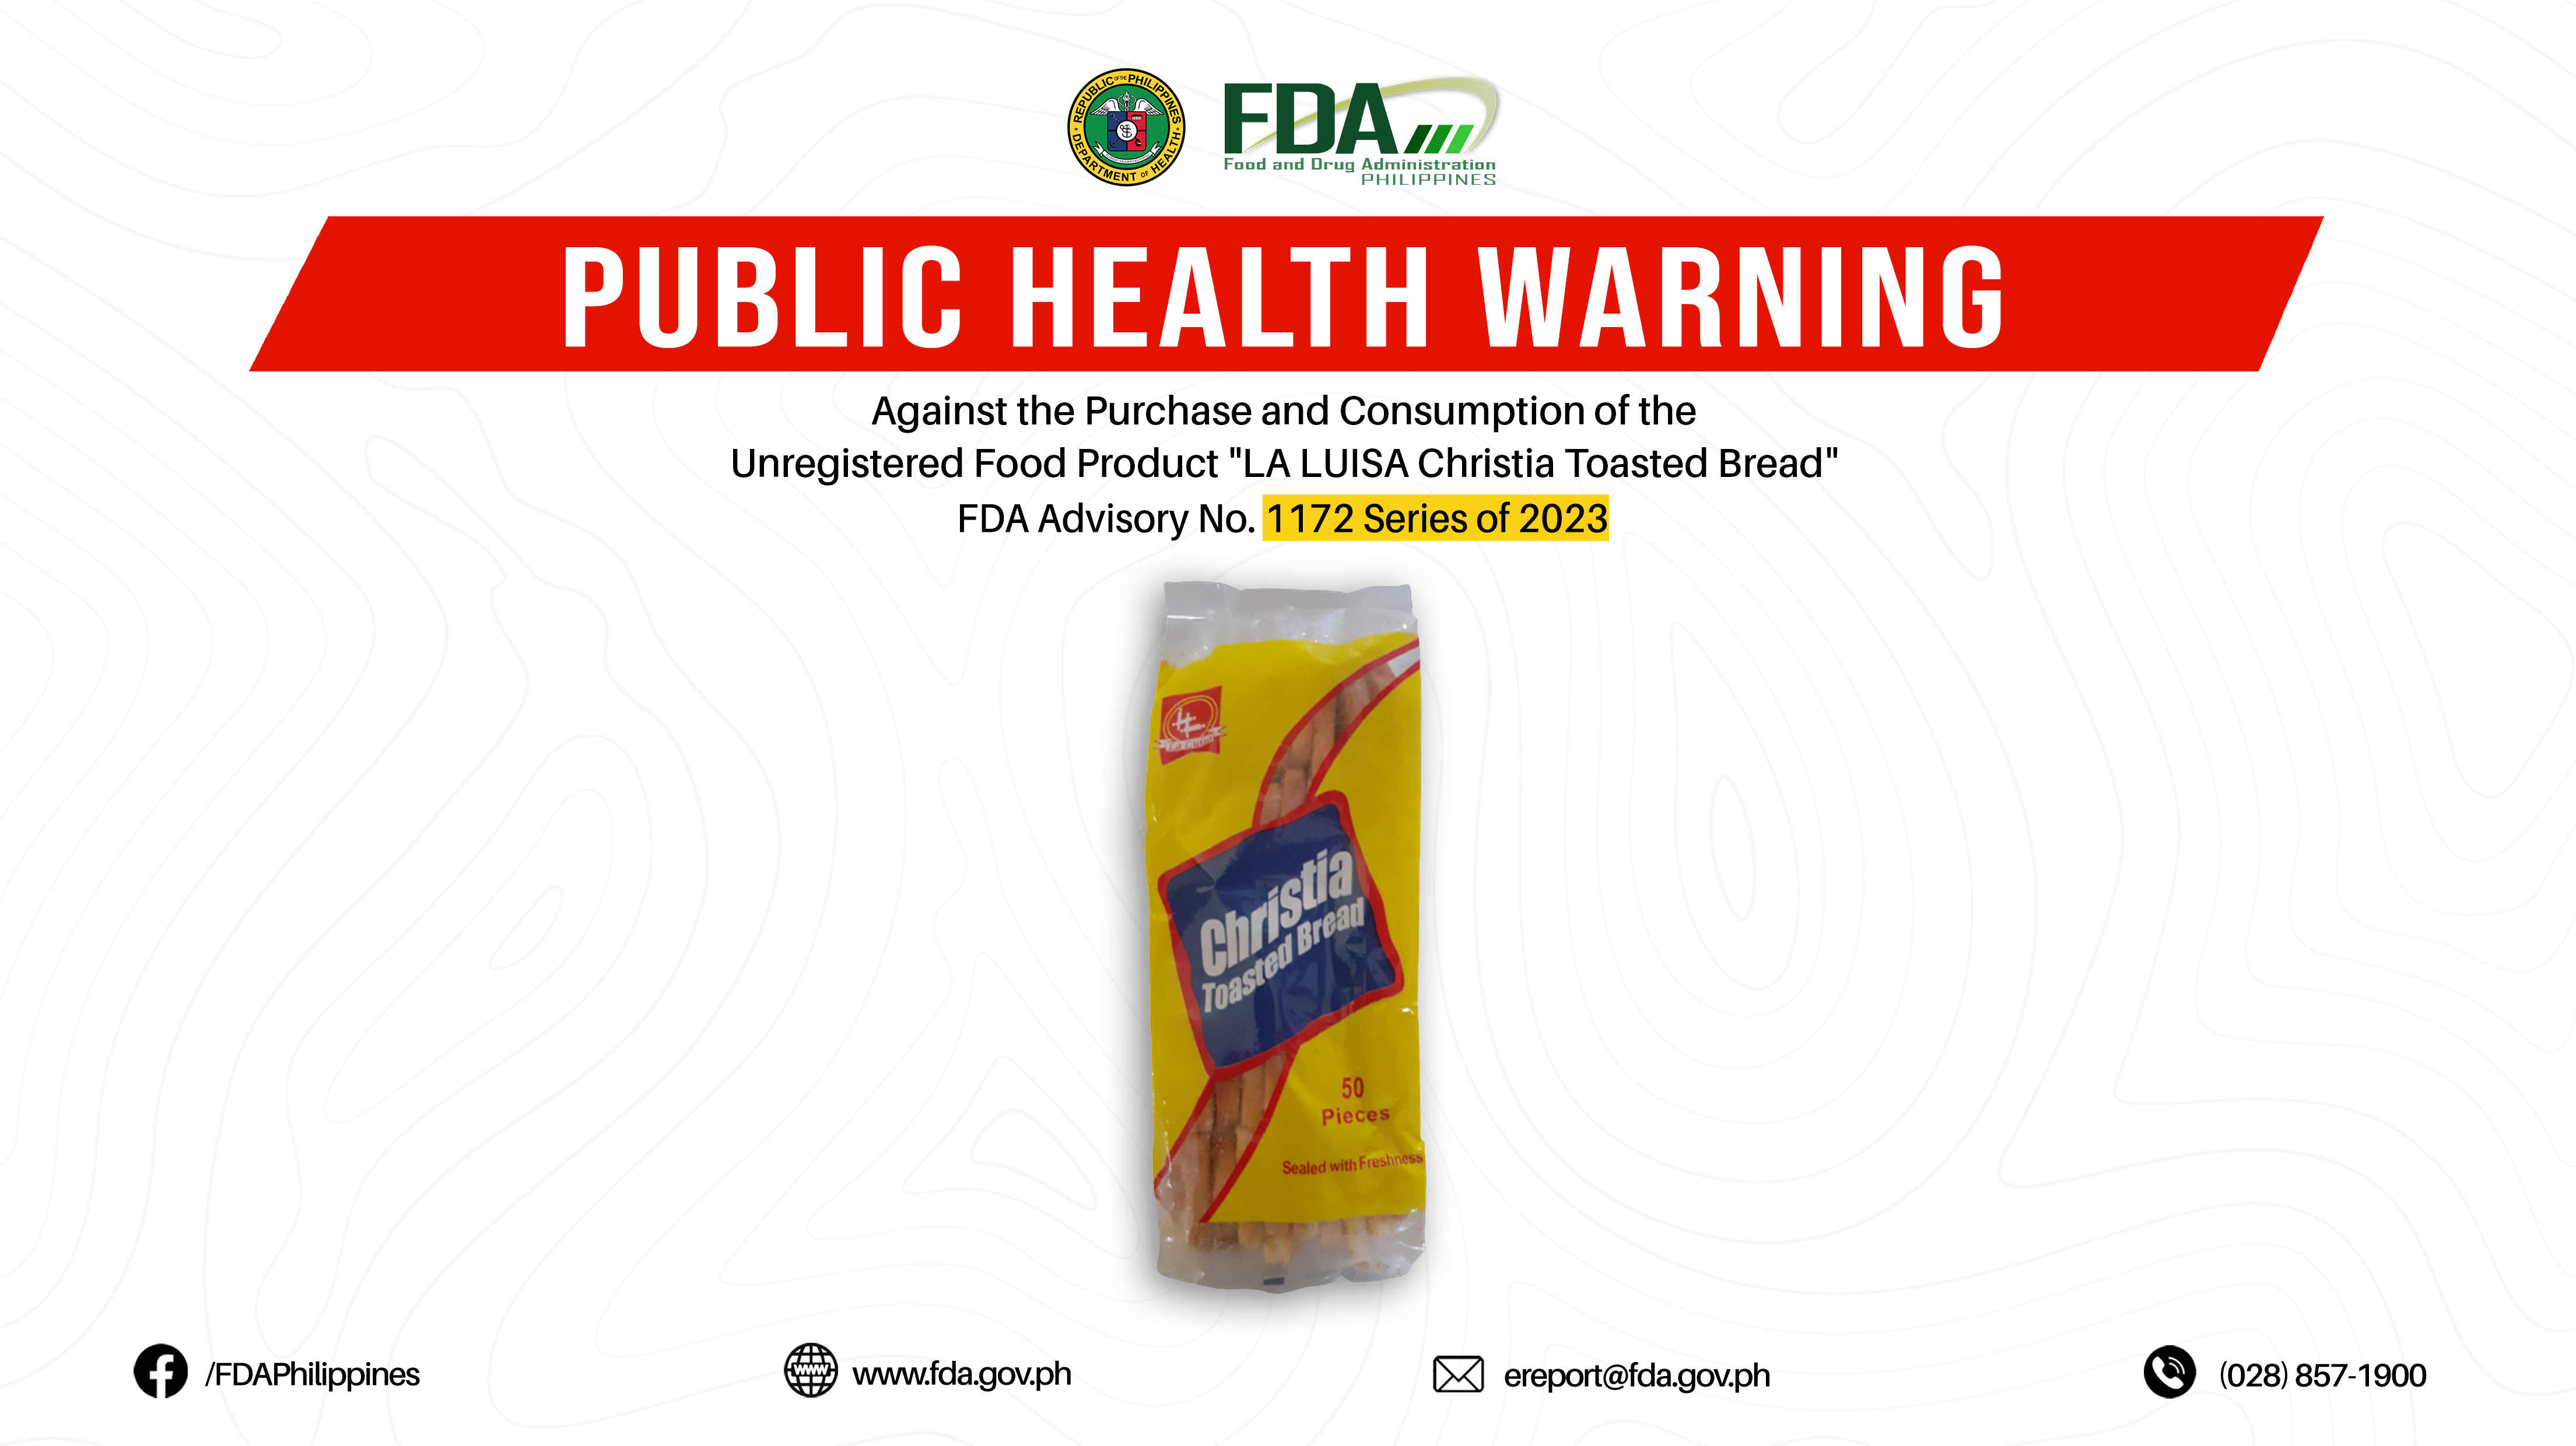 FDA Advisory No.2023-1172 || Public Health Warning Against the Purchase and Consumption of the Unregistered Food Product “LA LUISA Christia Toasted Bread”